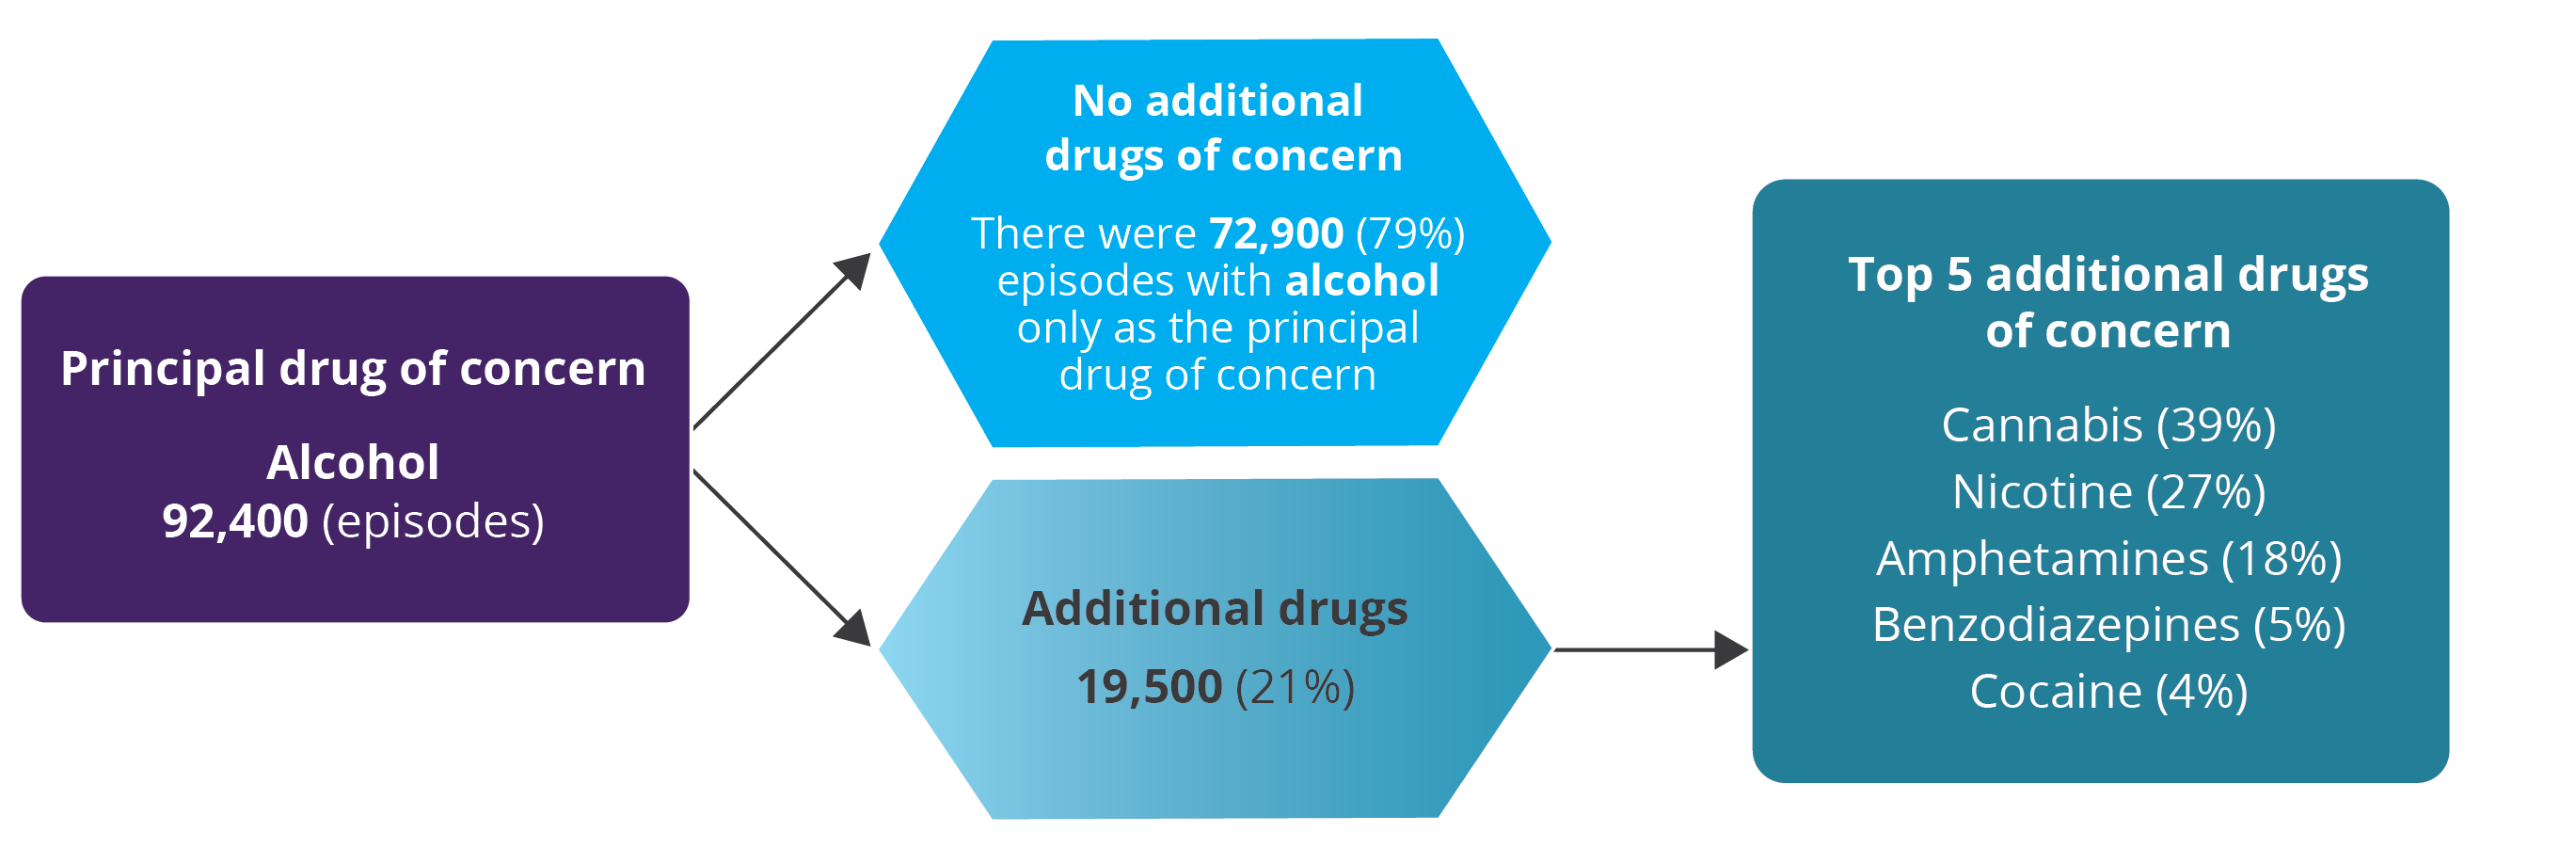 The flow chart shows alcohol as a principal drug of concern broken down by additional drugs of concern.